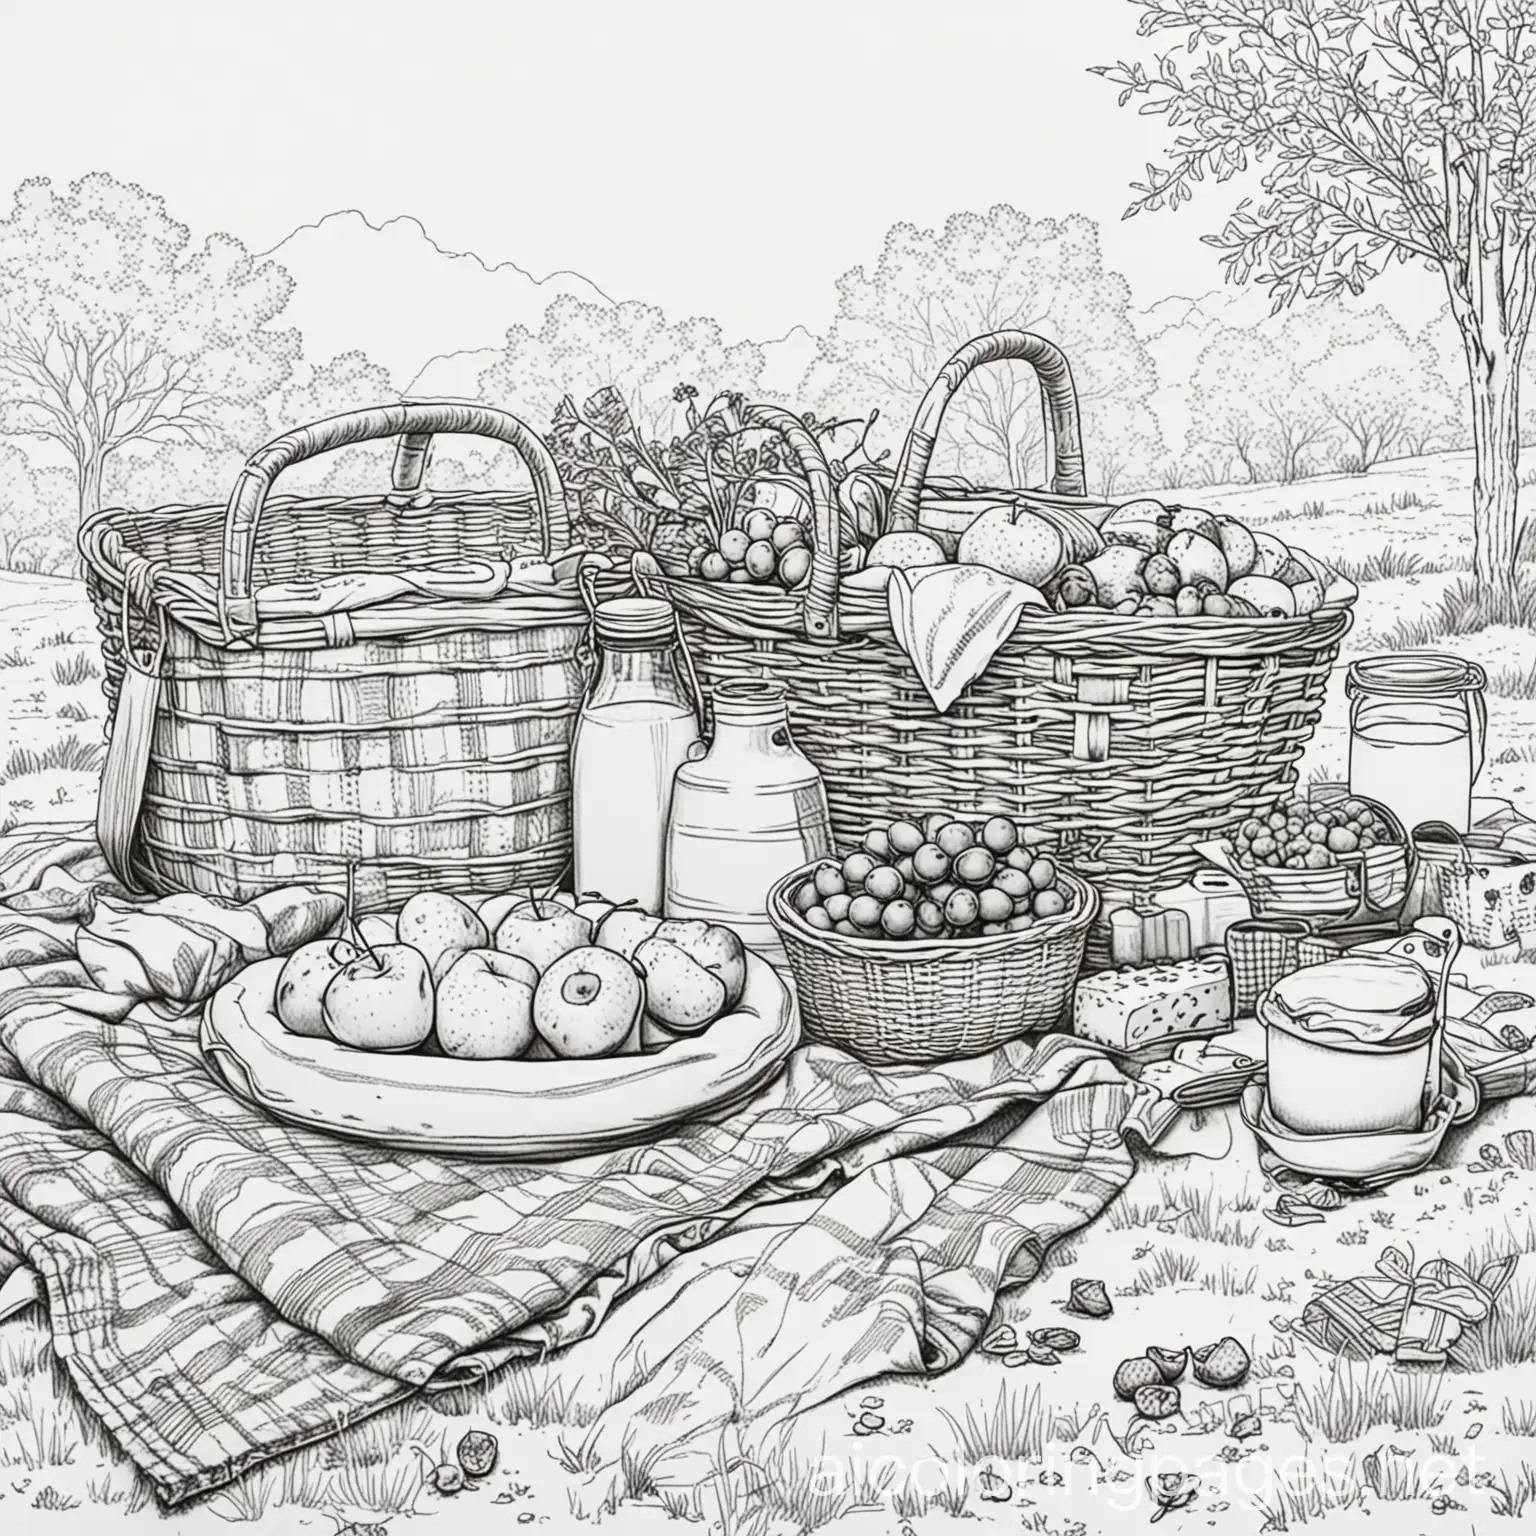 picnic , Coloring Page, black and white, line art, white background, Simplicity, Ample White Space. The background of the coloring page is plain white to make it easy for young children to color within the lines. The outlines of all the subjects are easy to distinguish, making it simple for kids to color without too much difficulty